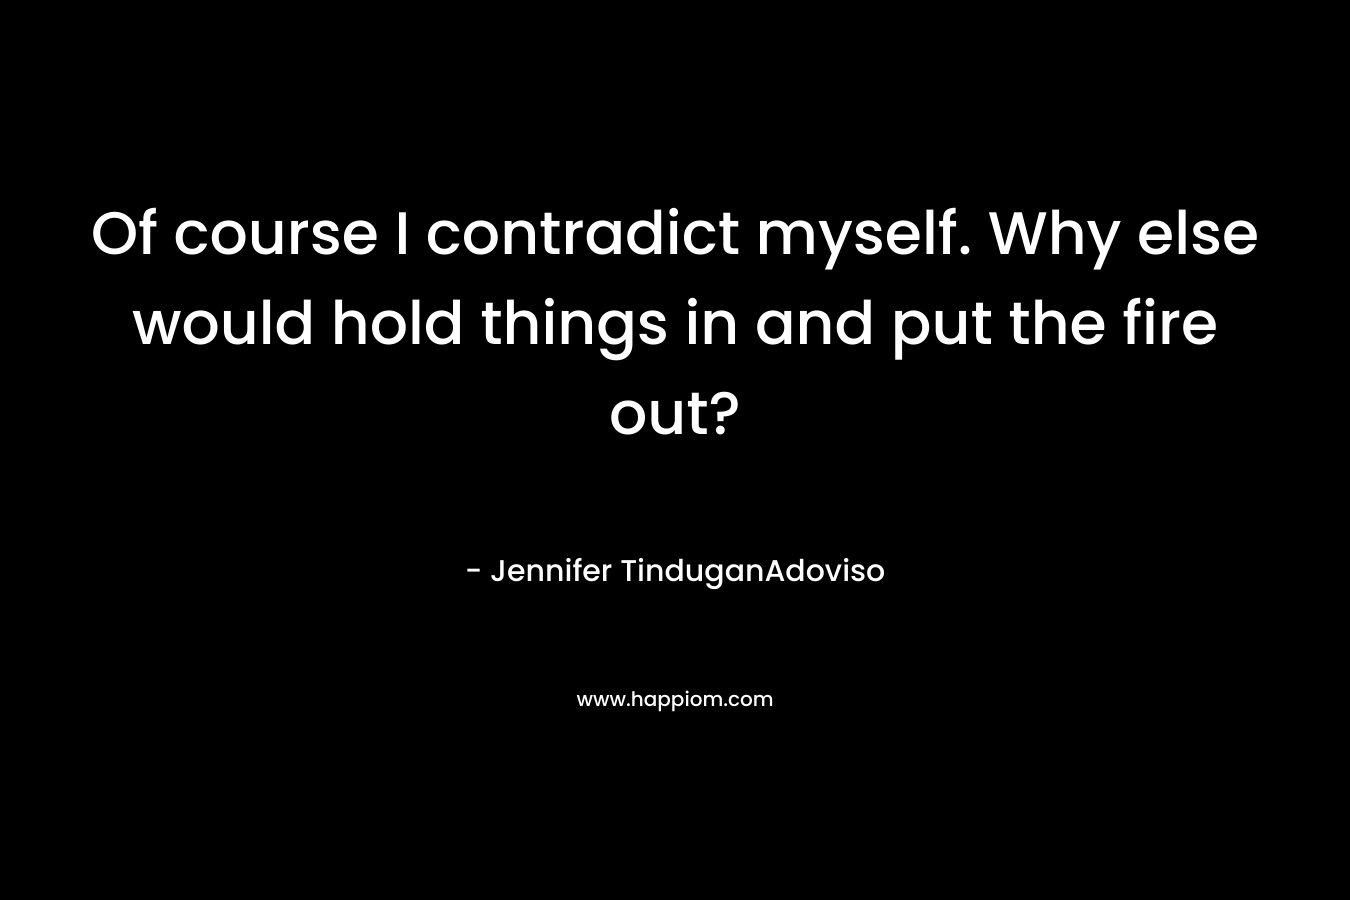 Of course I contradict myself. Why else would hold things in and put the fire out? – Jennifer TinduganAdoviso